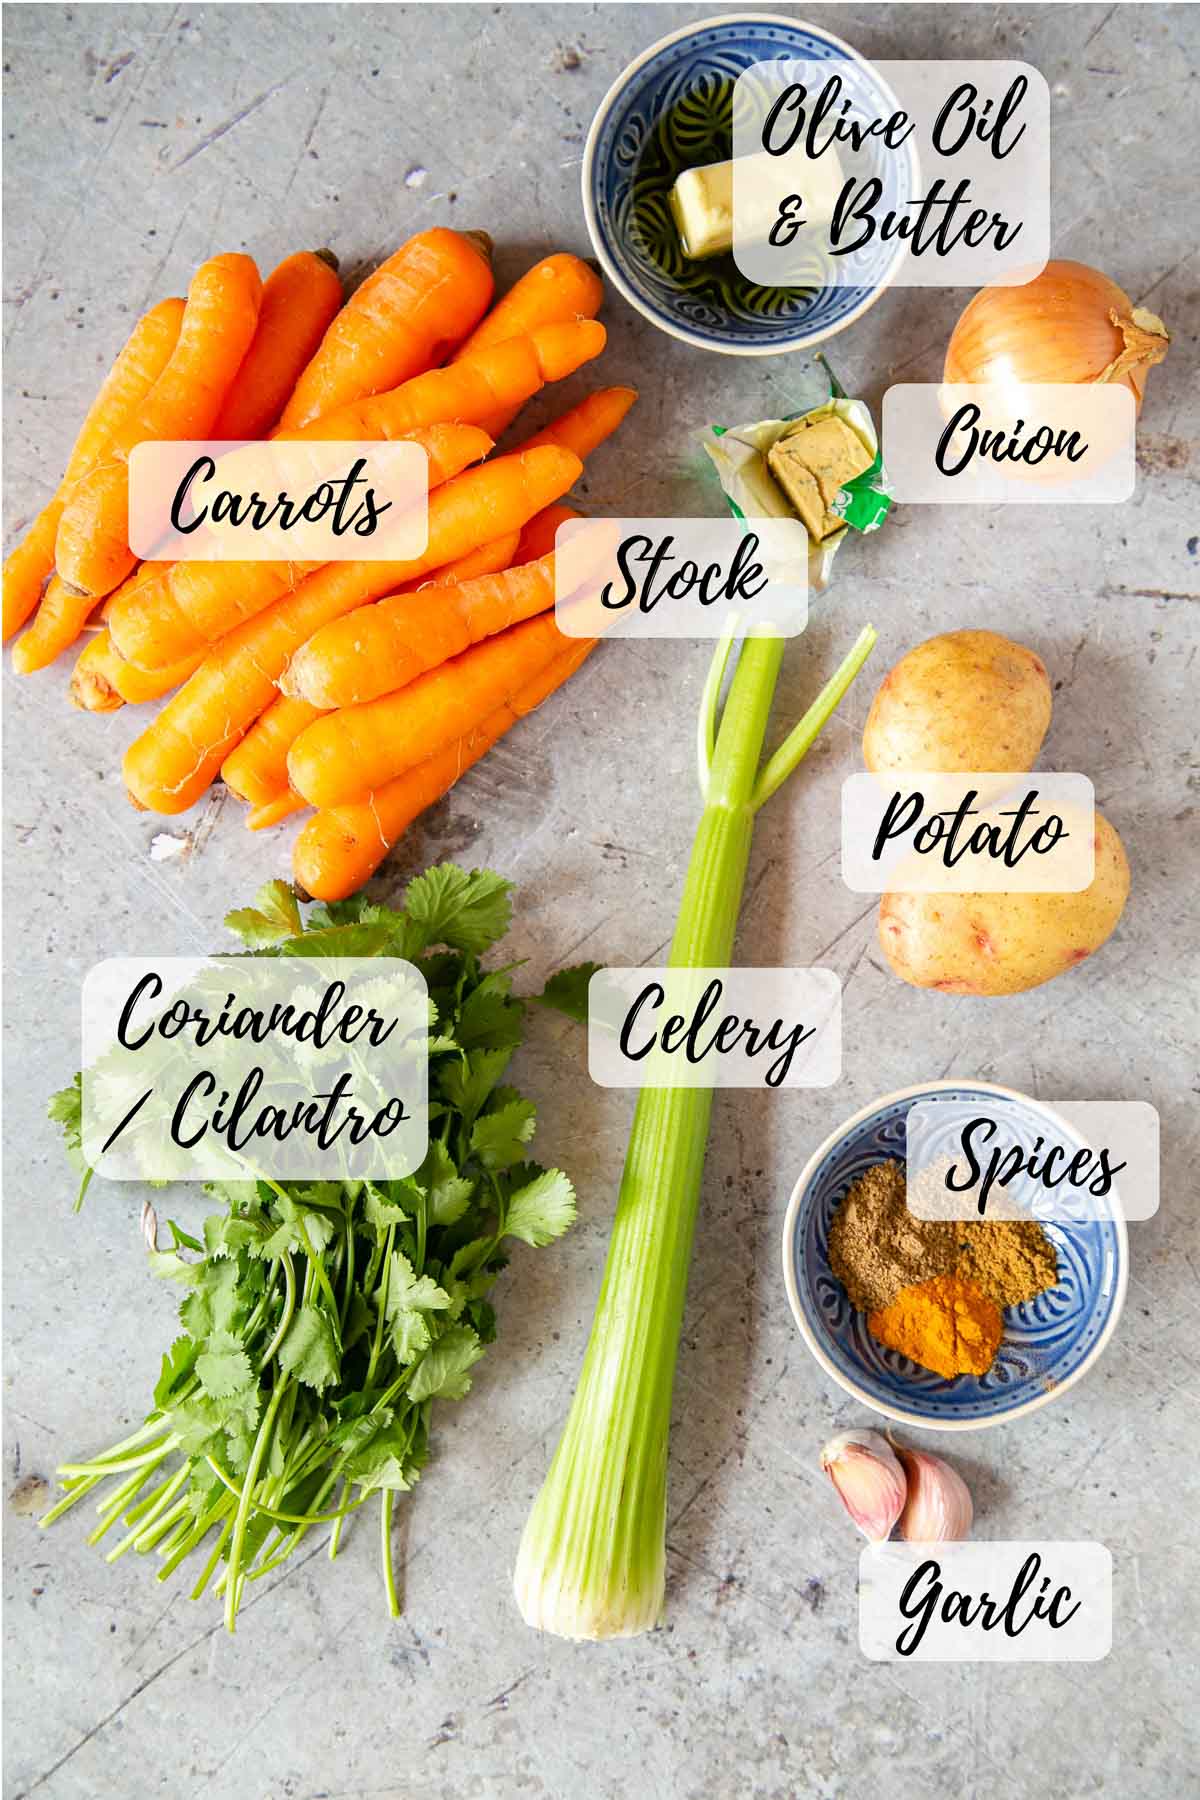 The ingredients: olive oil and butter, a stock cube, onion, potato, spices, garlic cloves, celery, coriander or cilantro, carrots